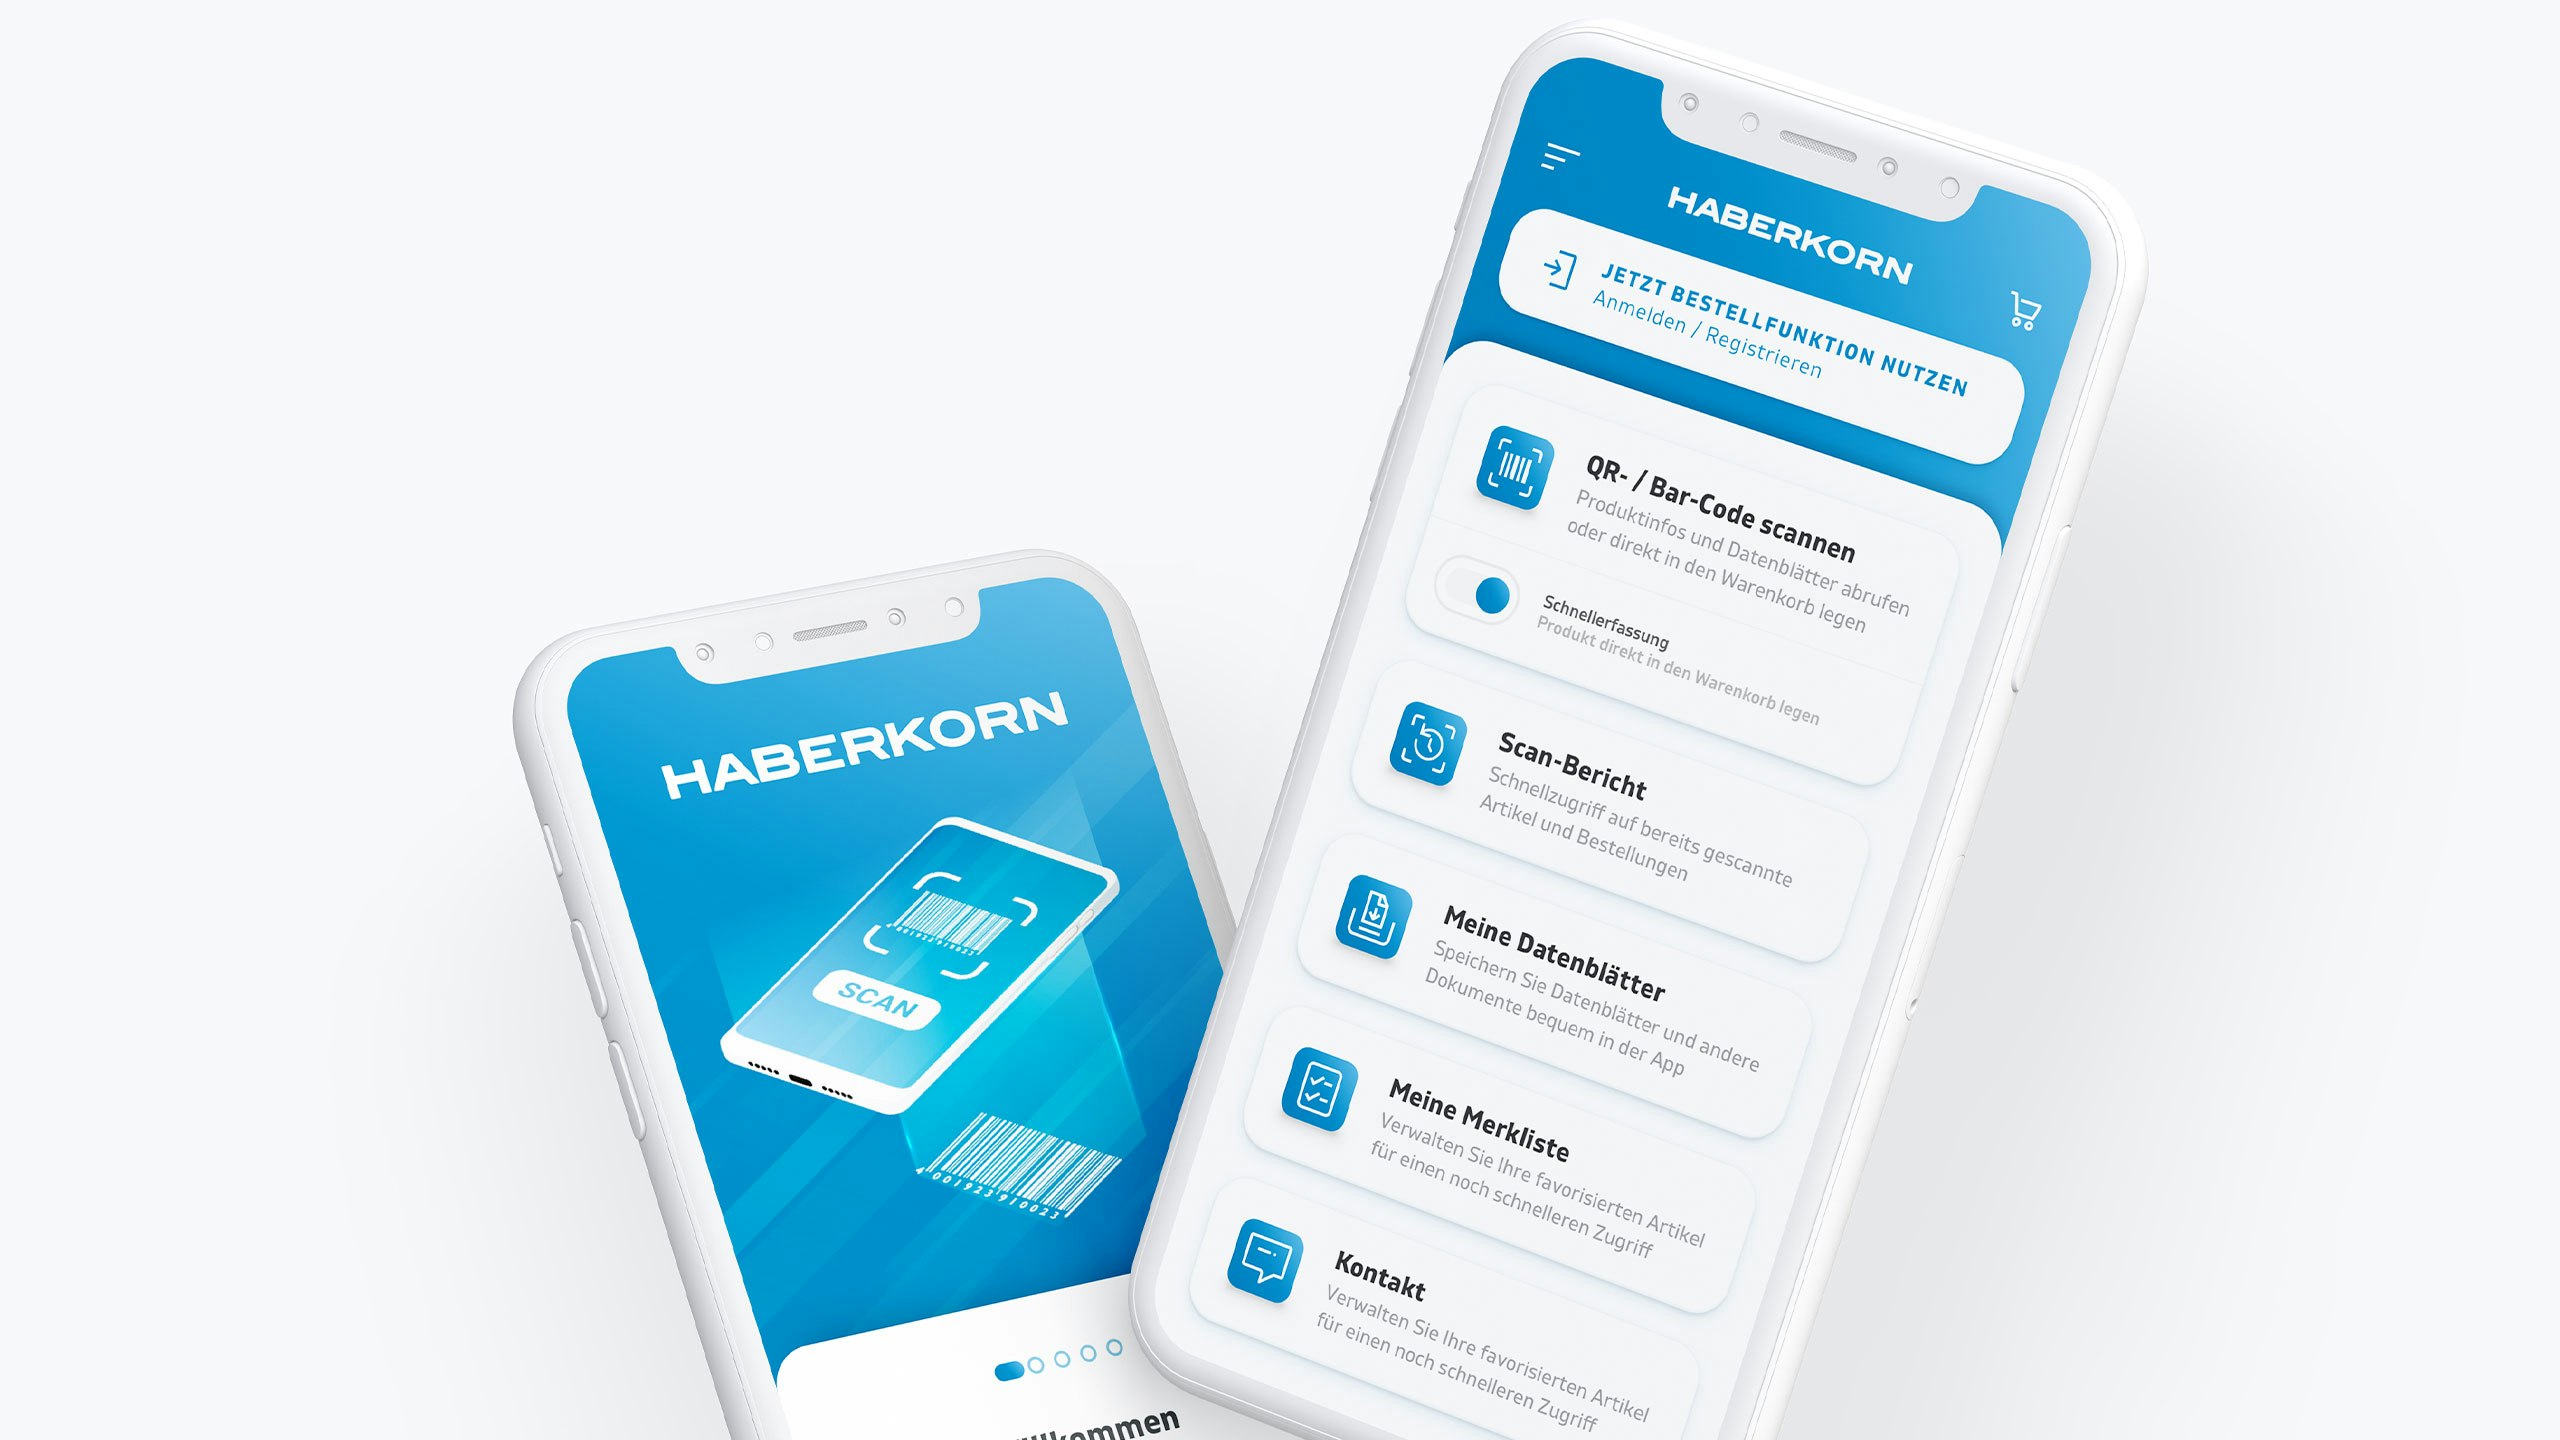 A mockup of two mobile devices showing designs of a new webshop by Haberkorn